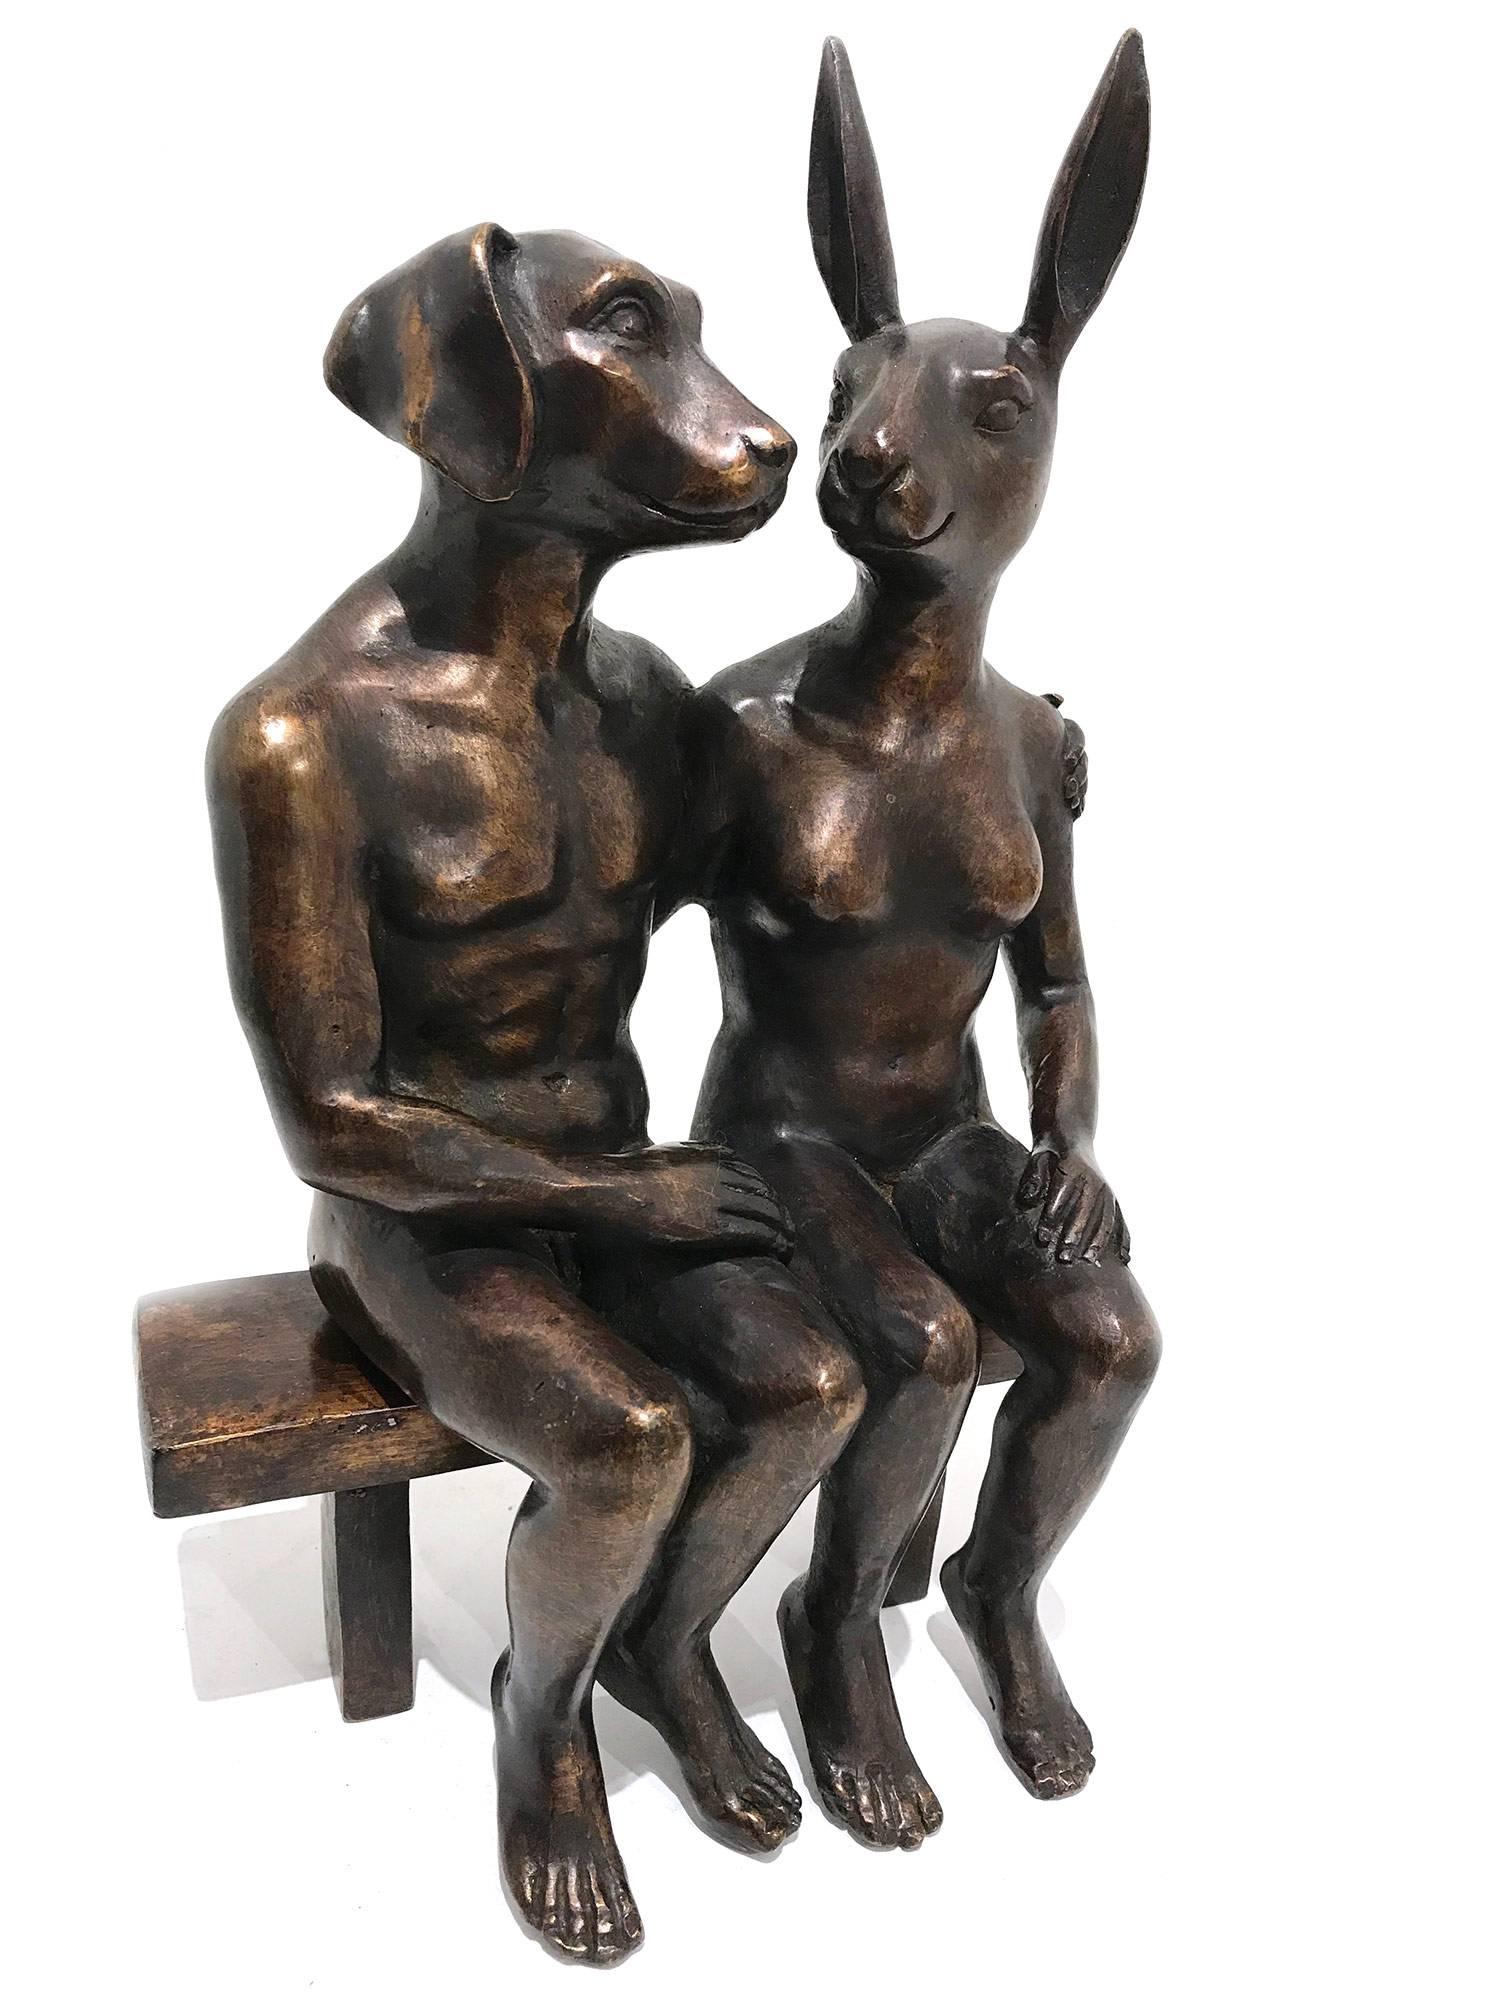 They Were Together Forever - Sculpture by Gillie and Marc Schattner